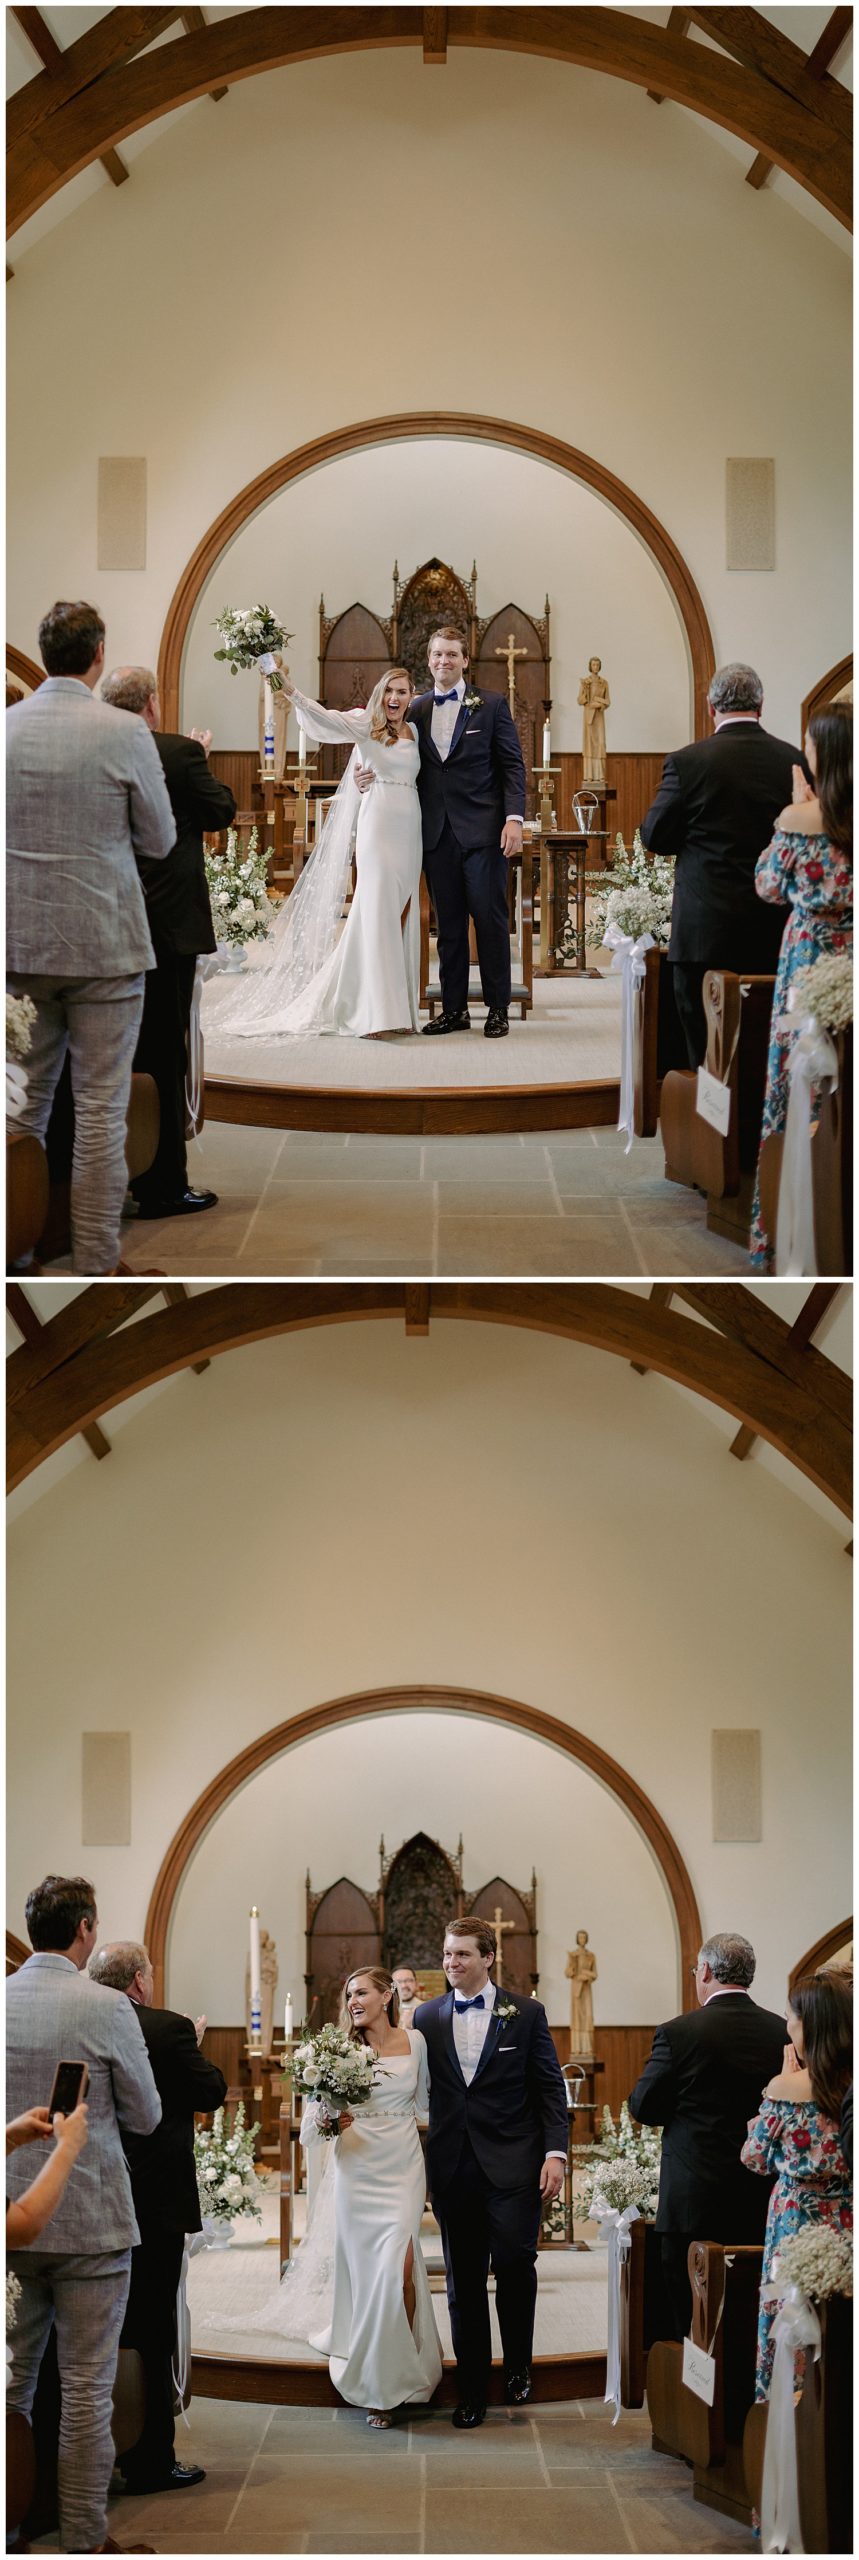 Chic Newport Wedding ceremony at Our Lady of Mercy Chapel in Rhode Island